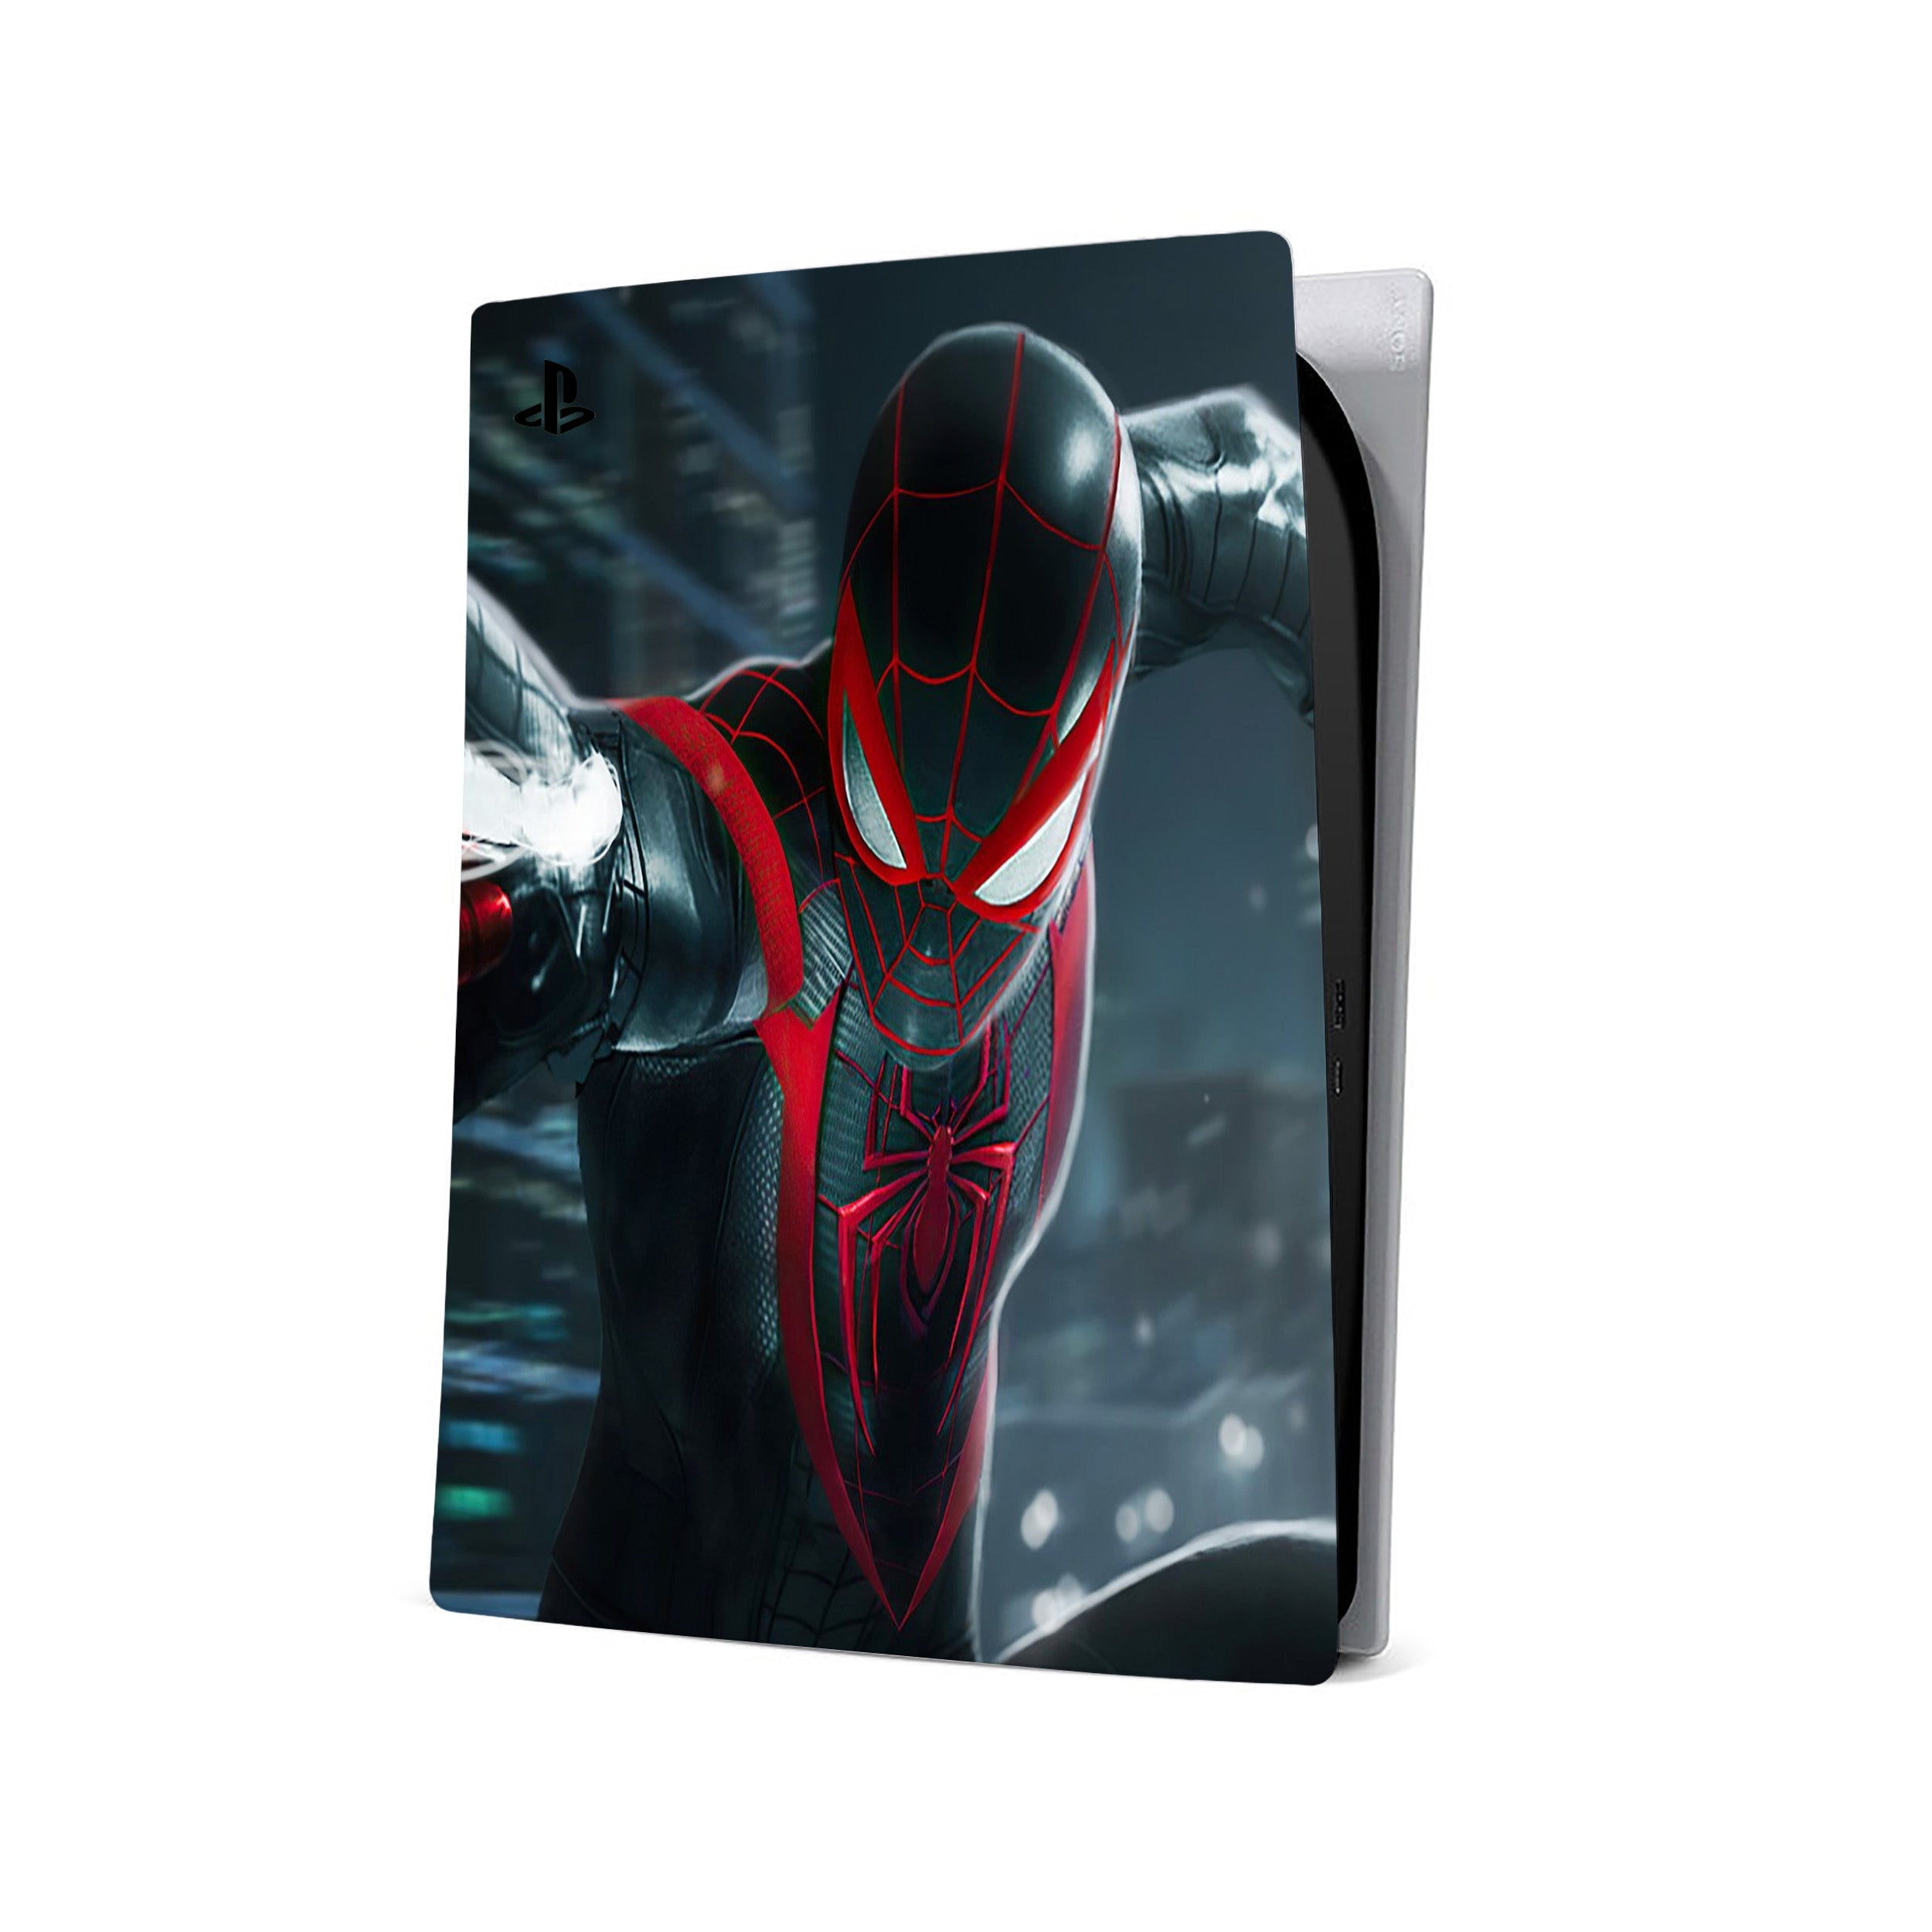 A video game skin featuring a Marvel Spiderman Miles Morales design for the PS5.